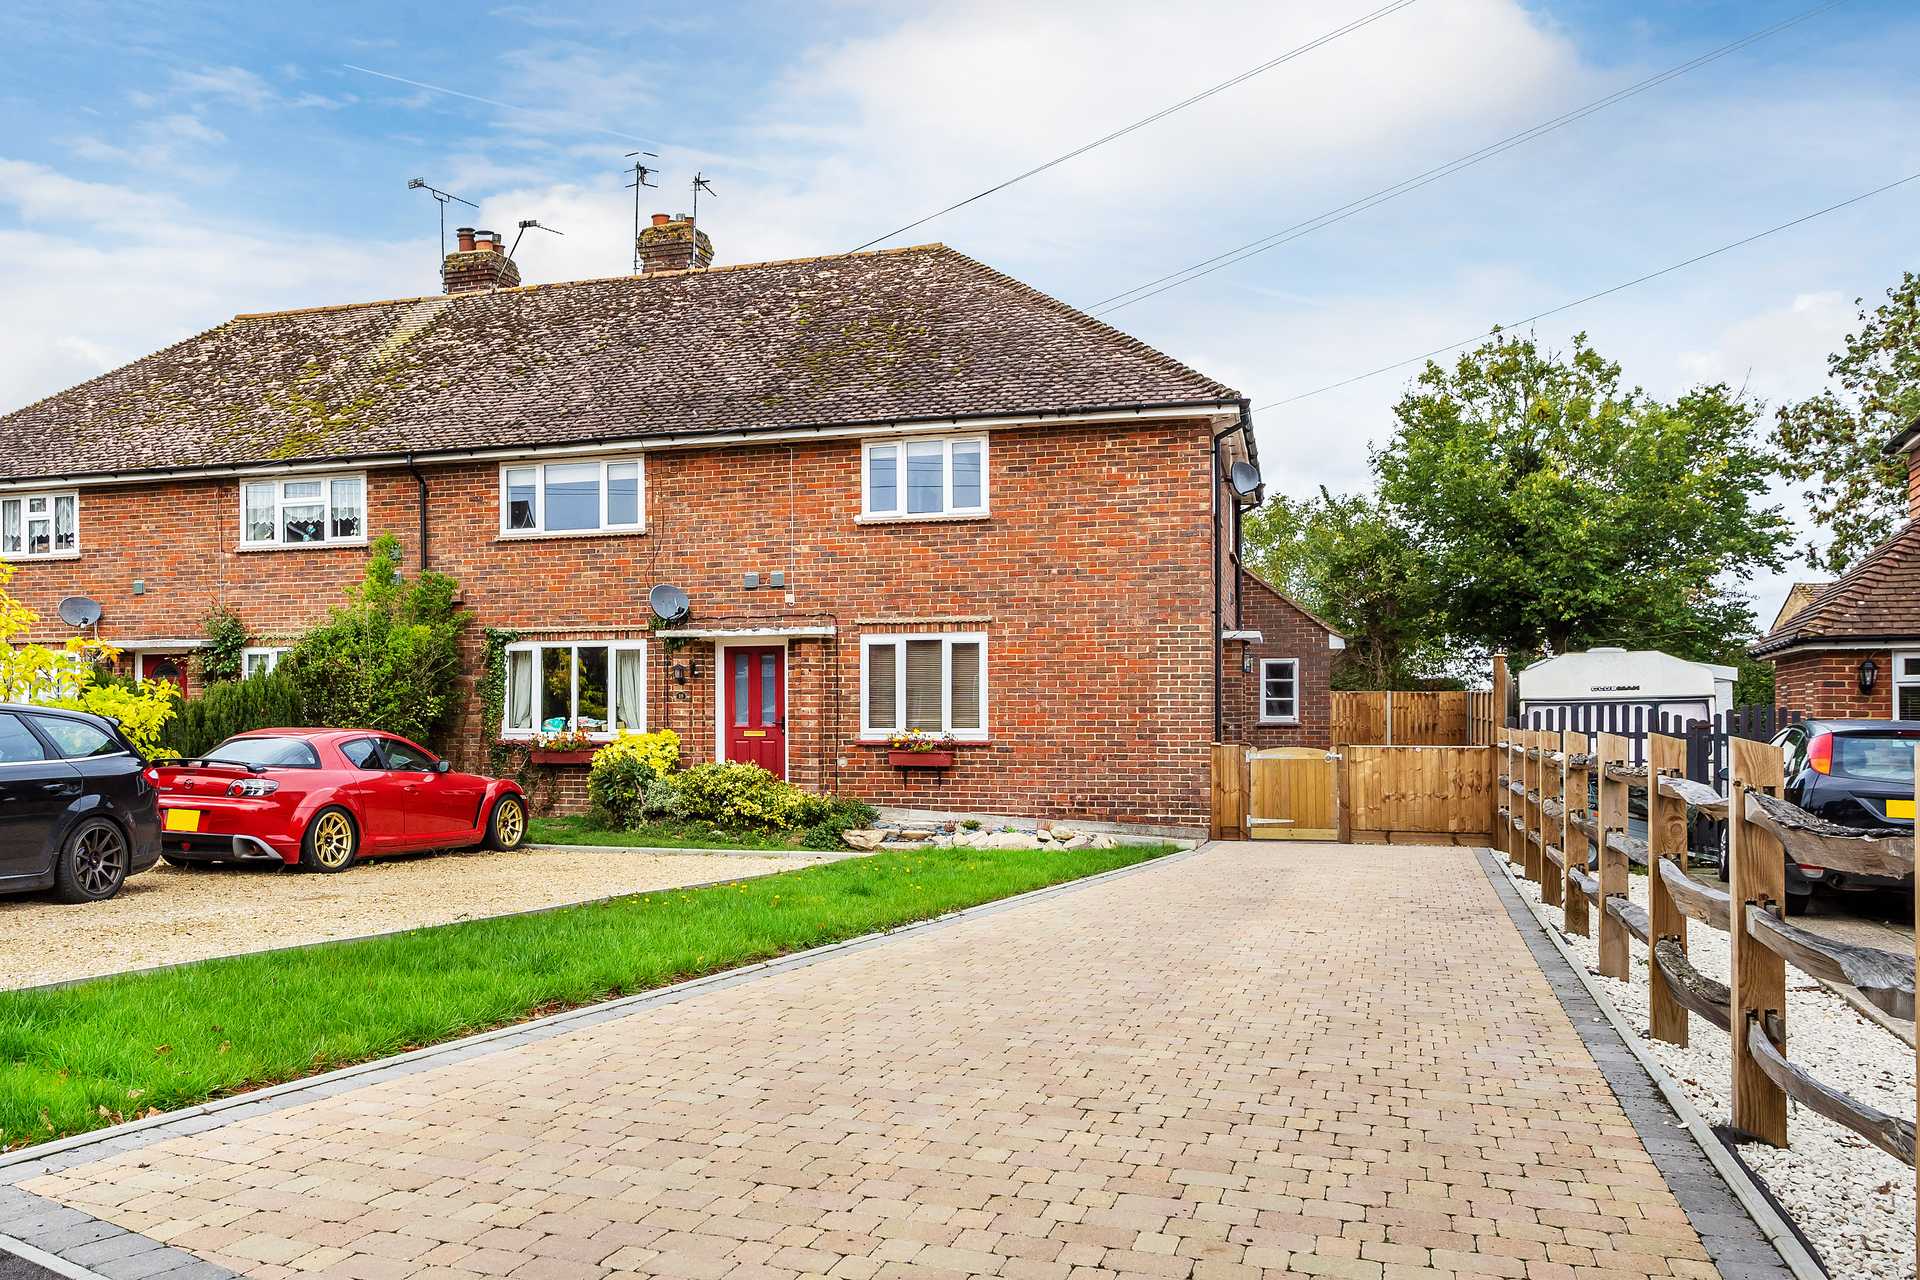 House in Charlwood, Surrey 10048680